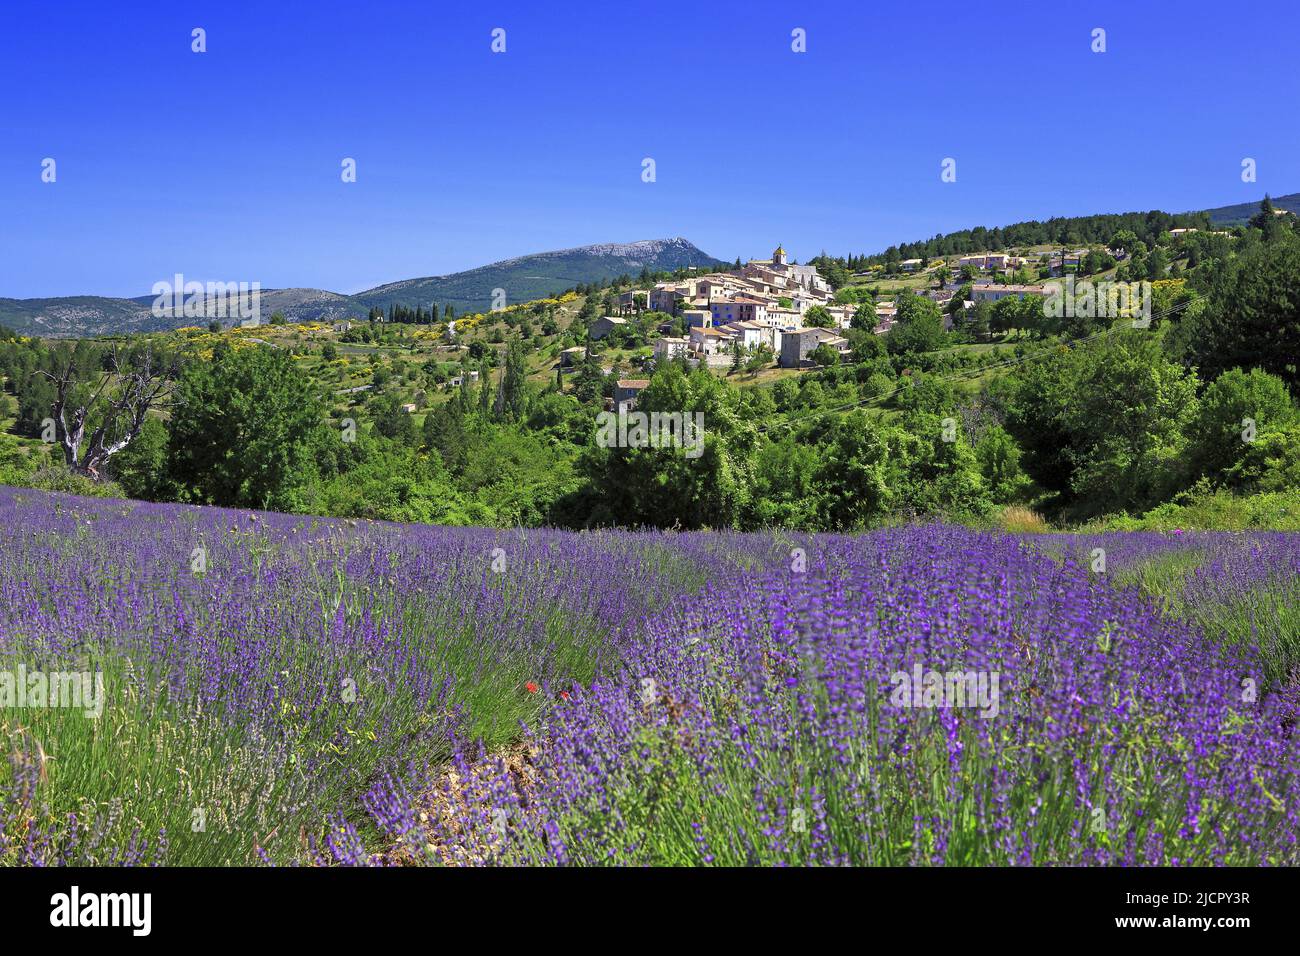 France, Vaucluse Aurel, the village seen from the lavender fields Stock Photo